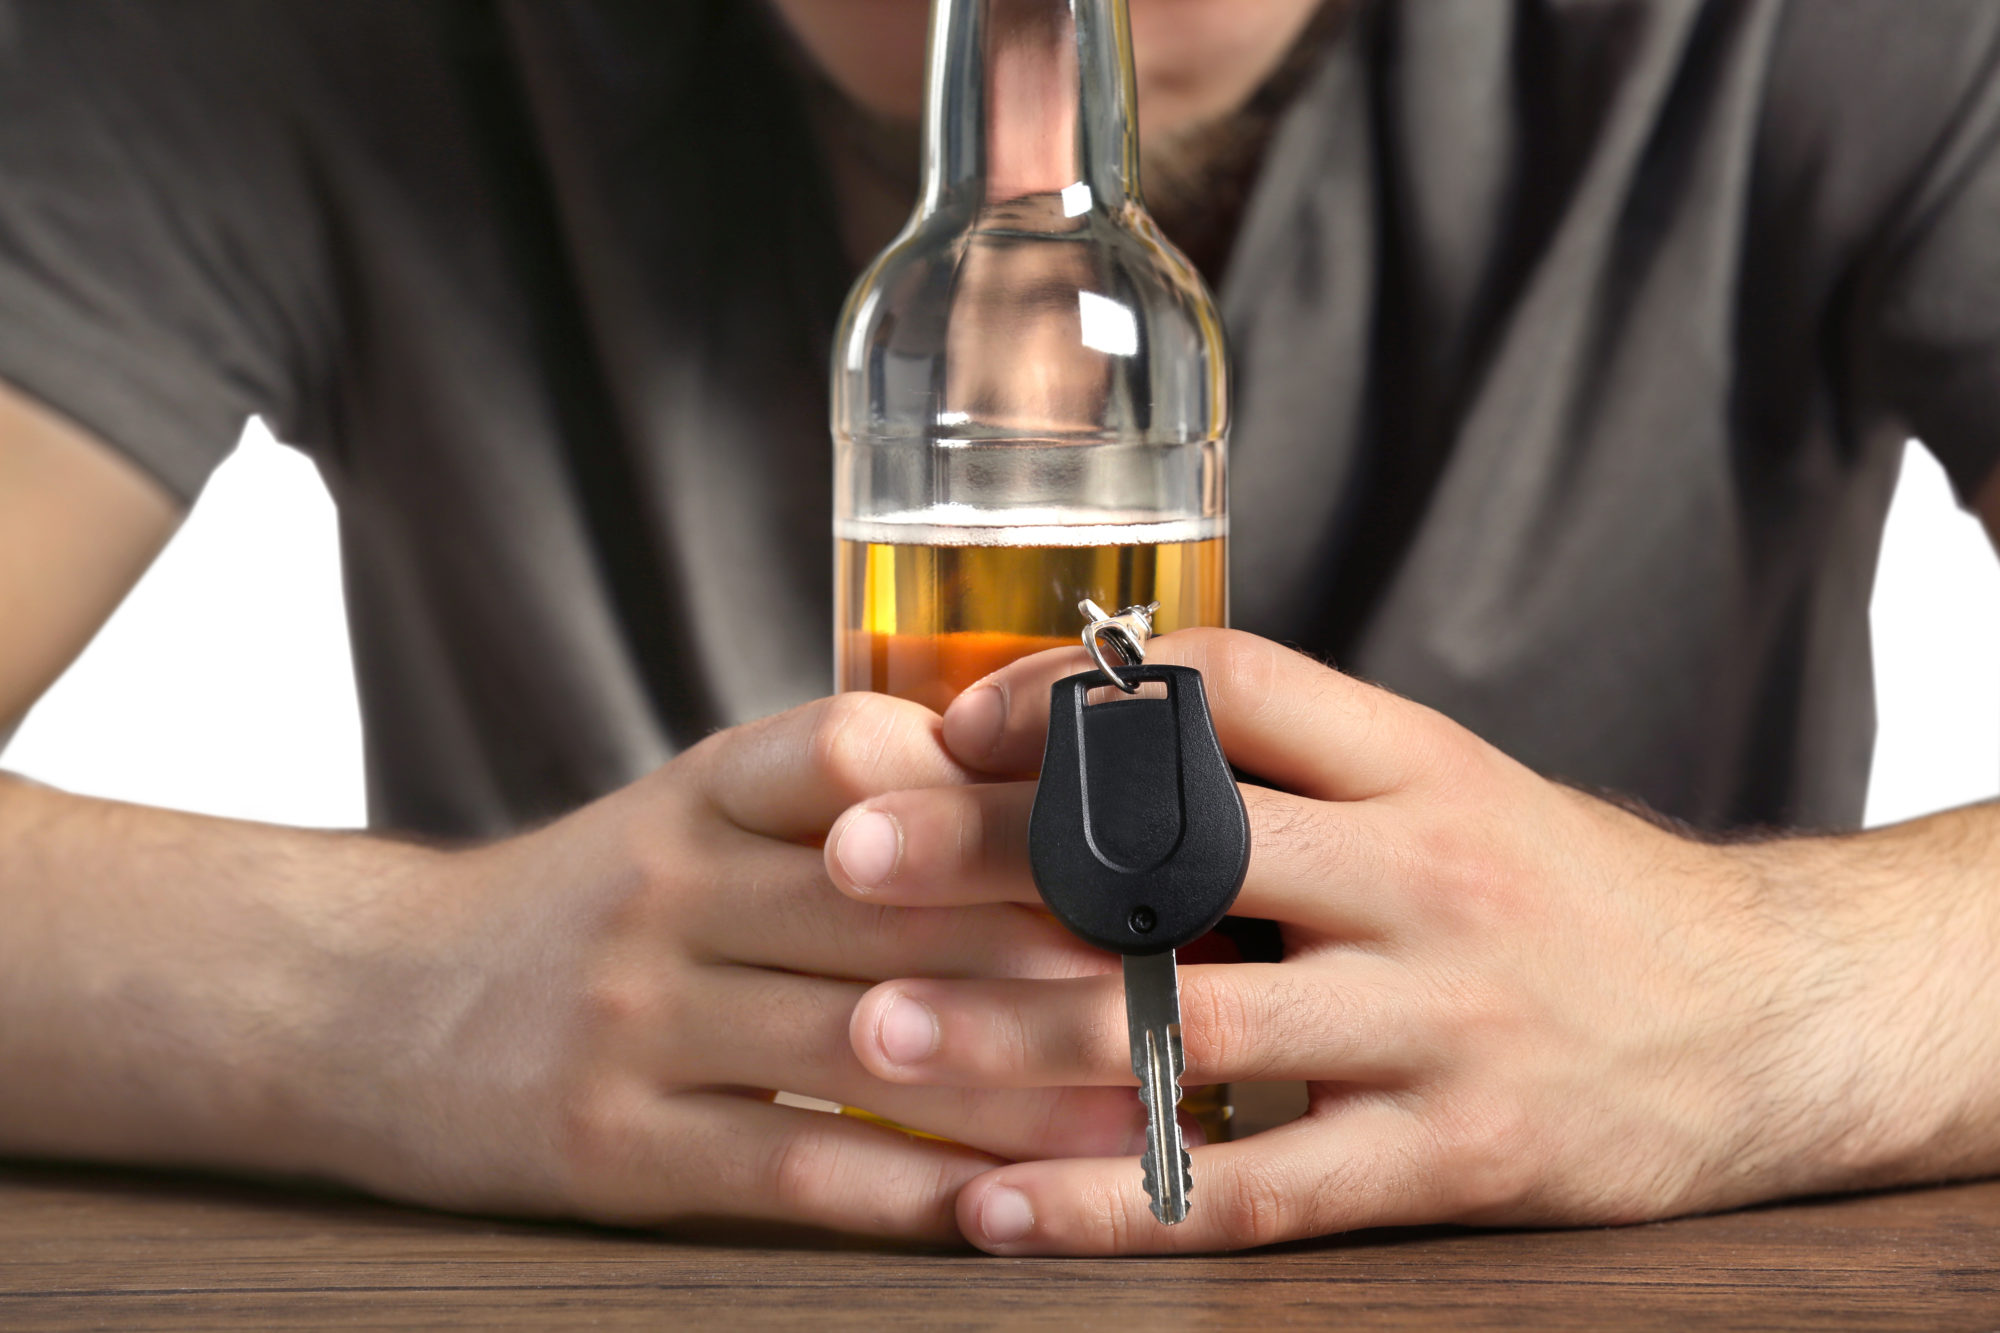 Close Up View Of Male Hands With Bottle Of Beer And Car Key